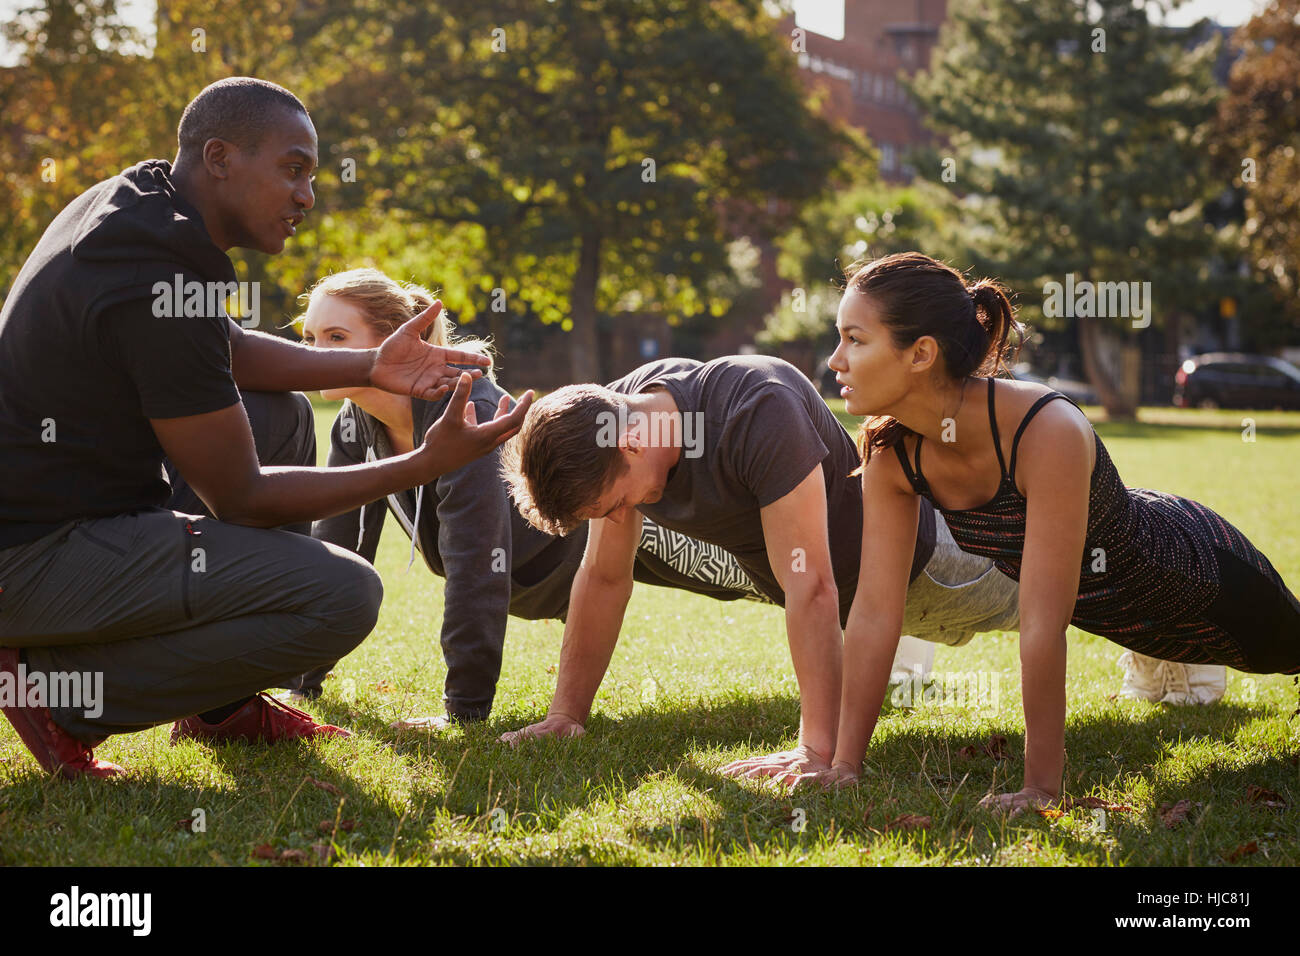 Personal Trainer Instructing Man And Women Doing Push Ups In Park Stock